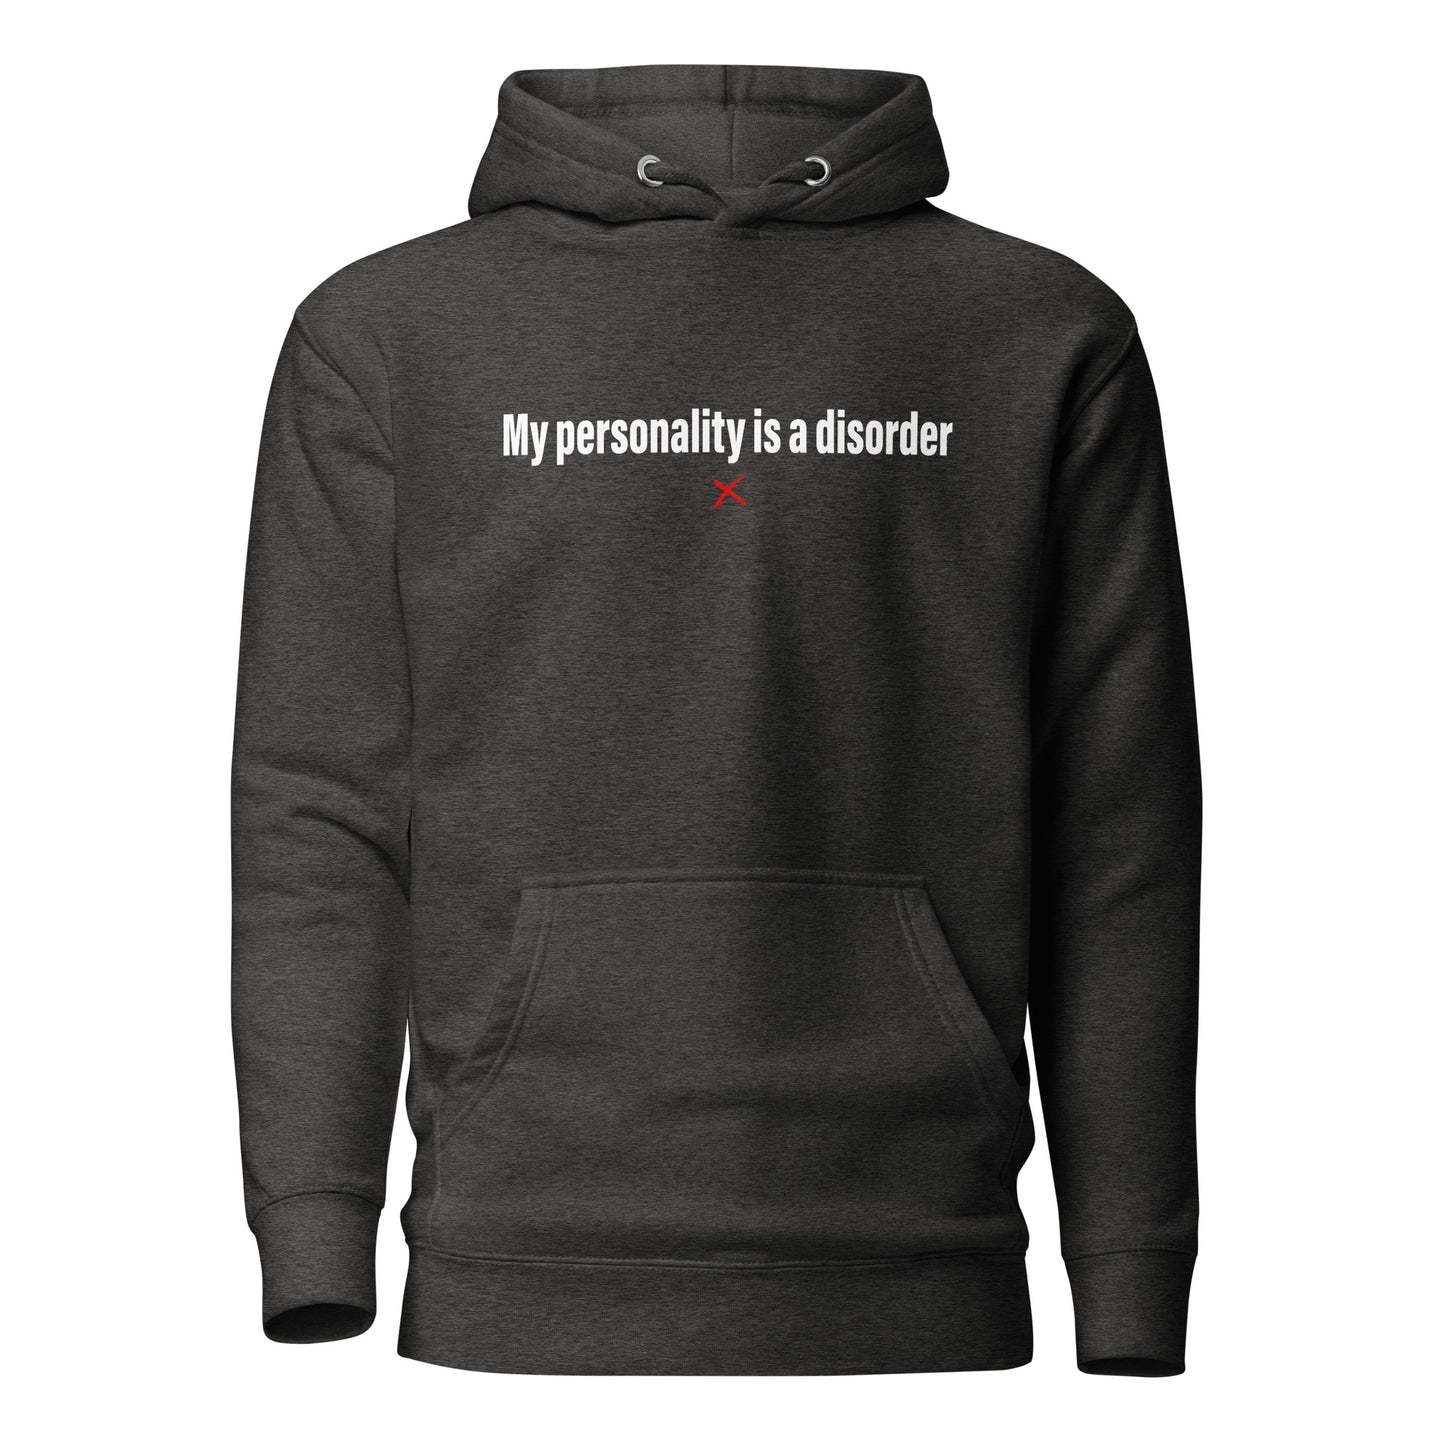 My personality is a disorder - Hoodie